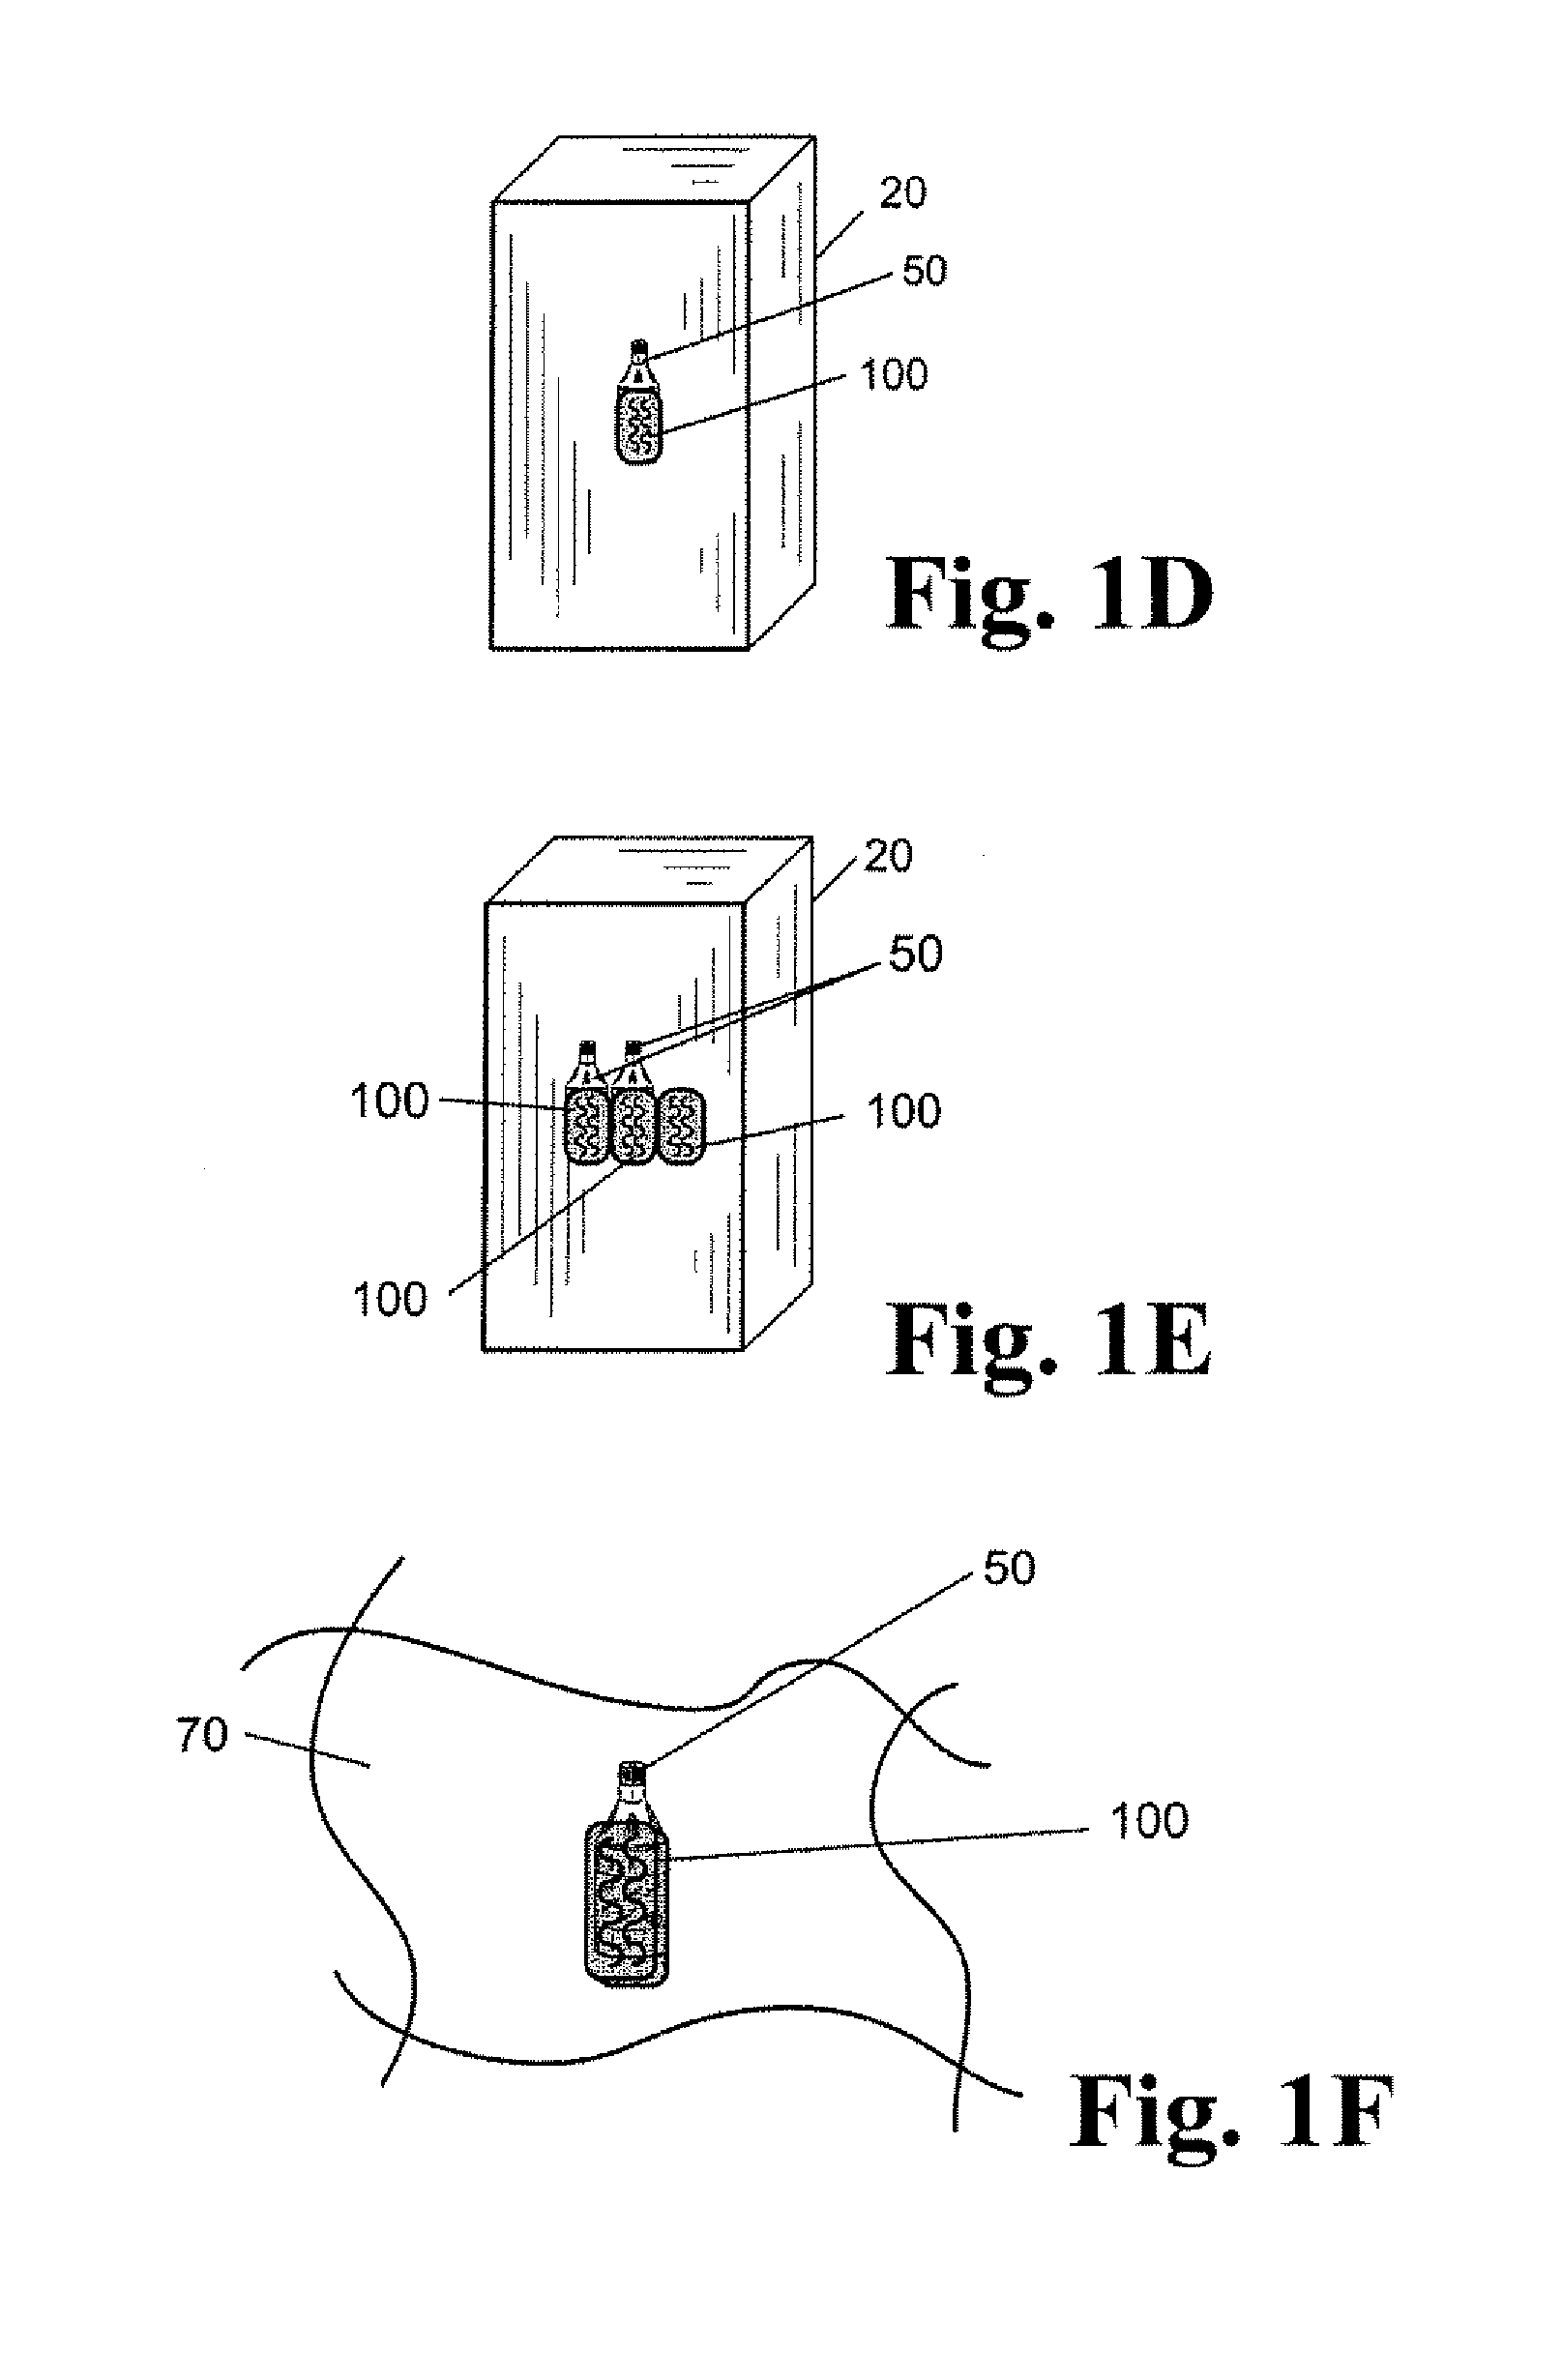 Method of Adjusting Temperatures of Products to Desired Product Temperatures